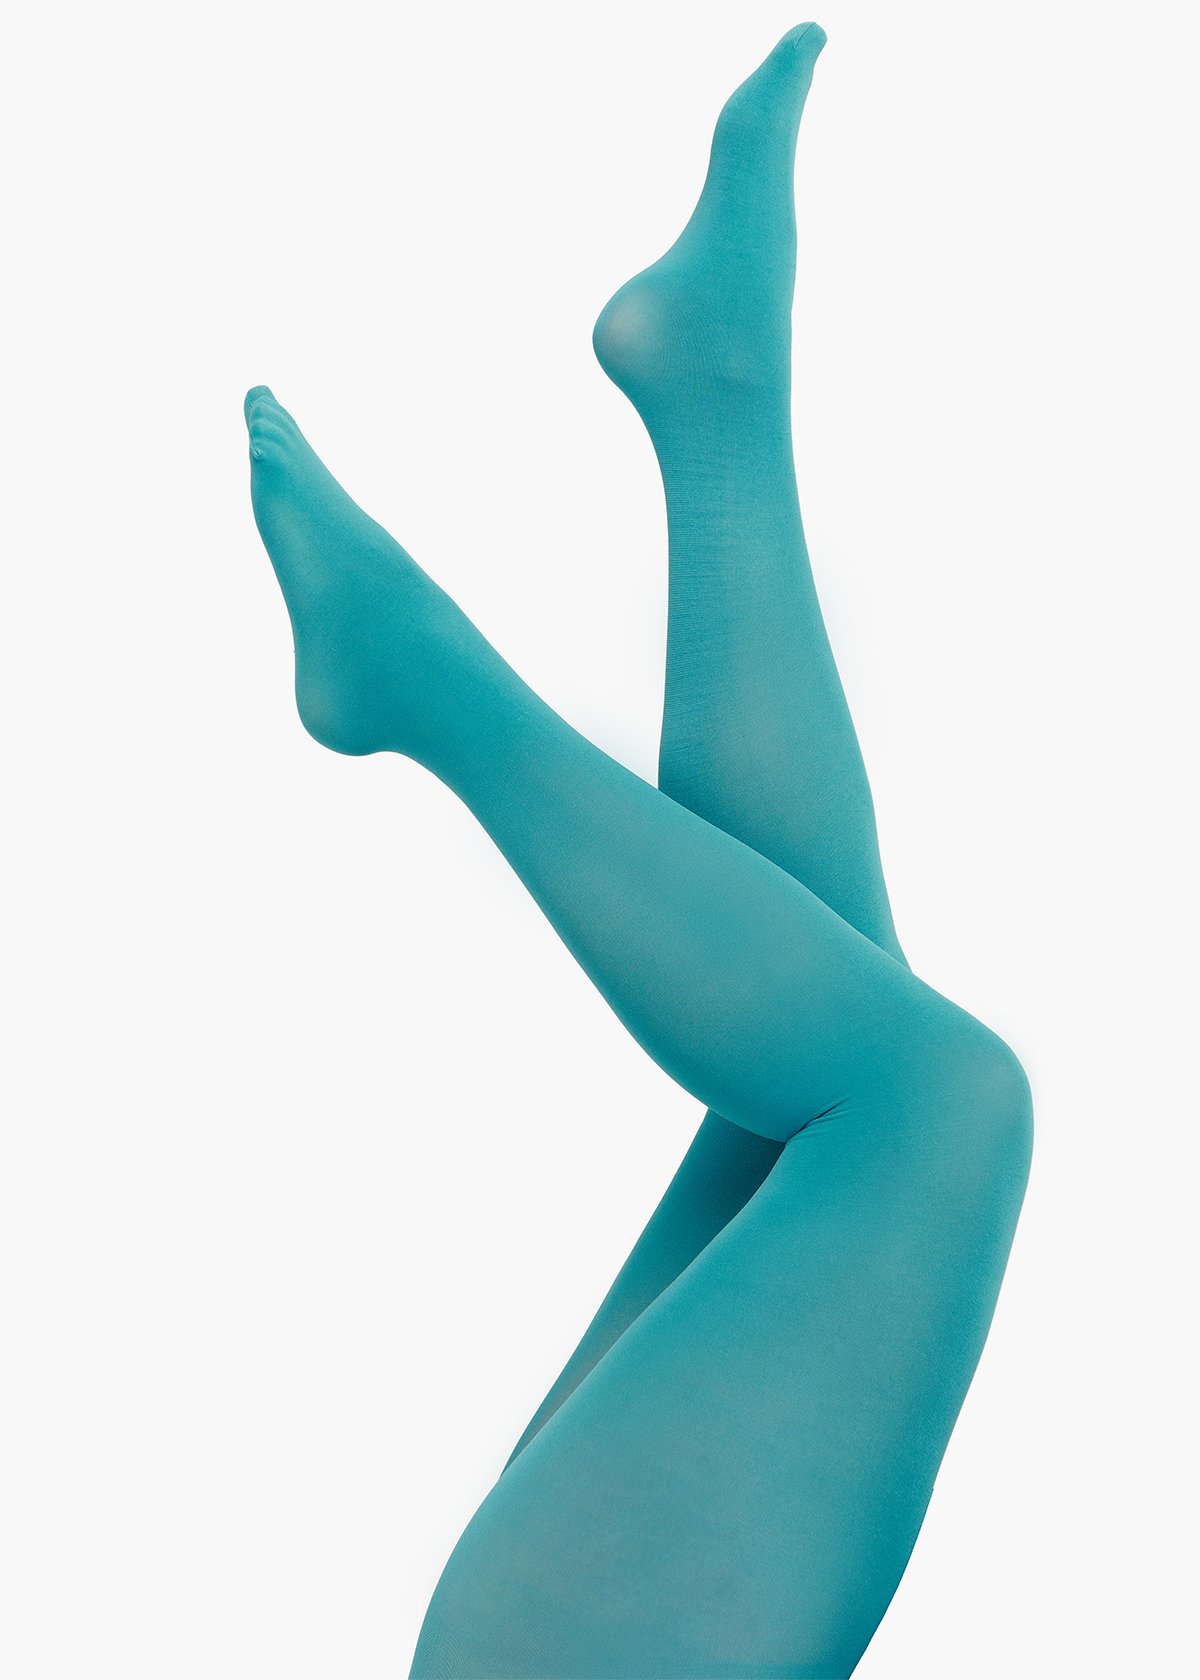 80 Denier Opaque Teal Tights in colour 3053 | Taking Shape